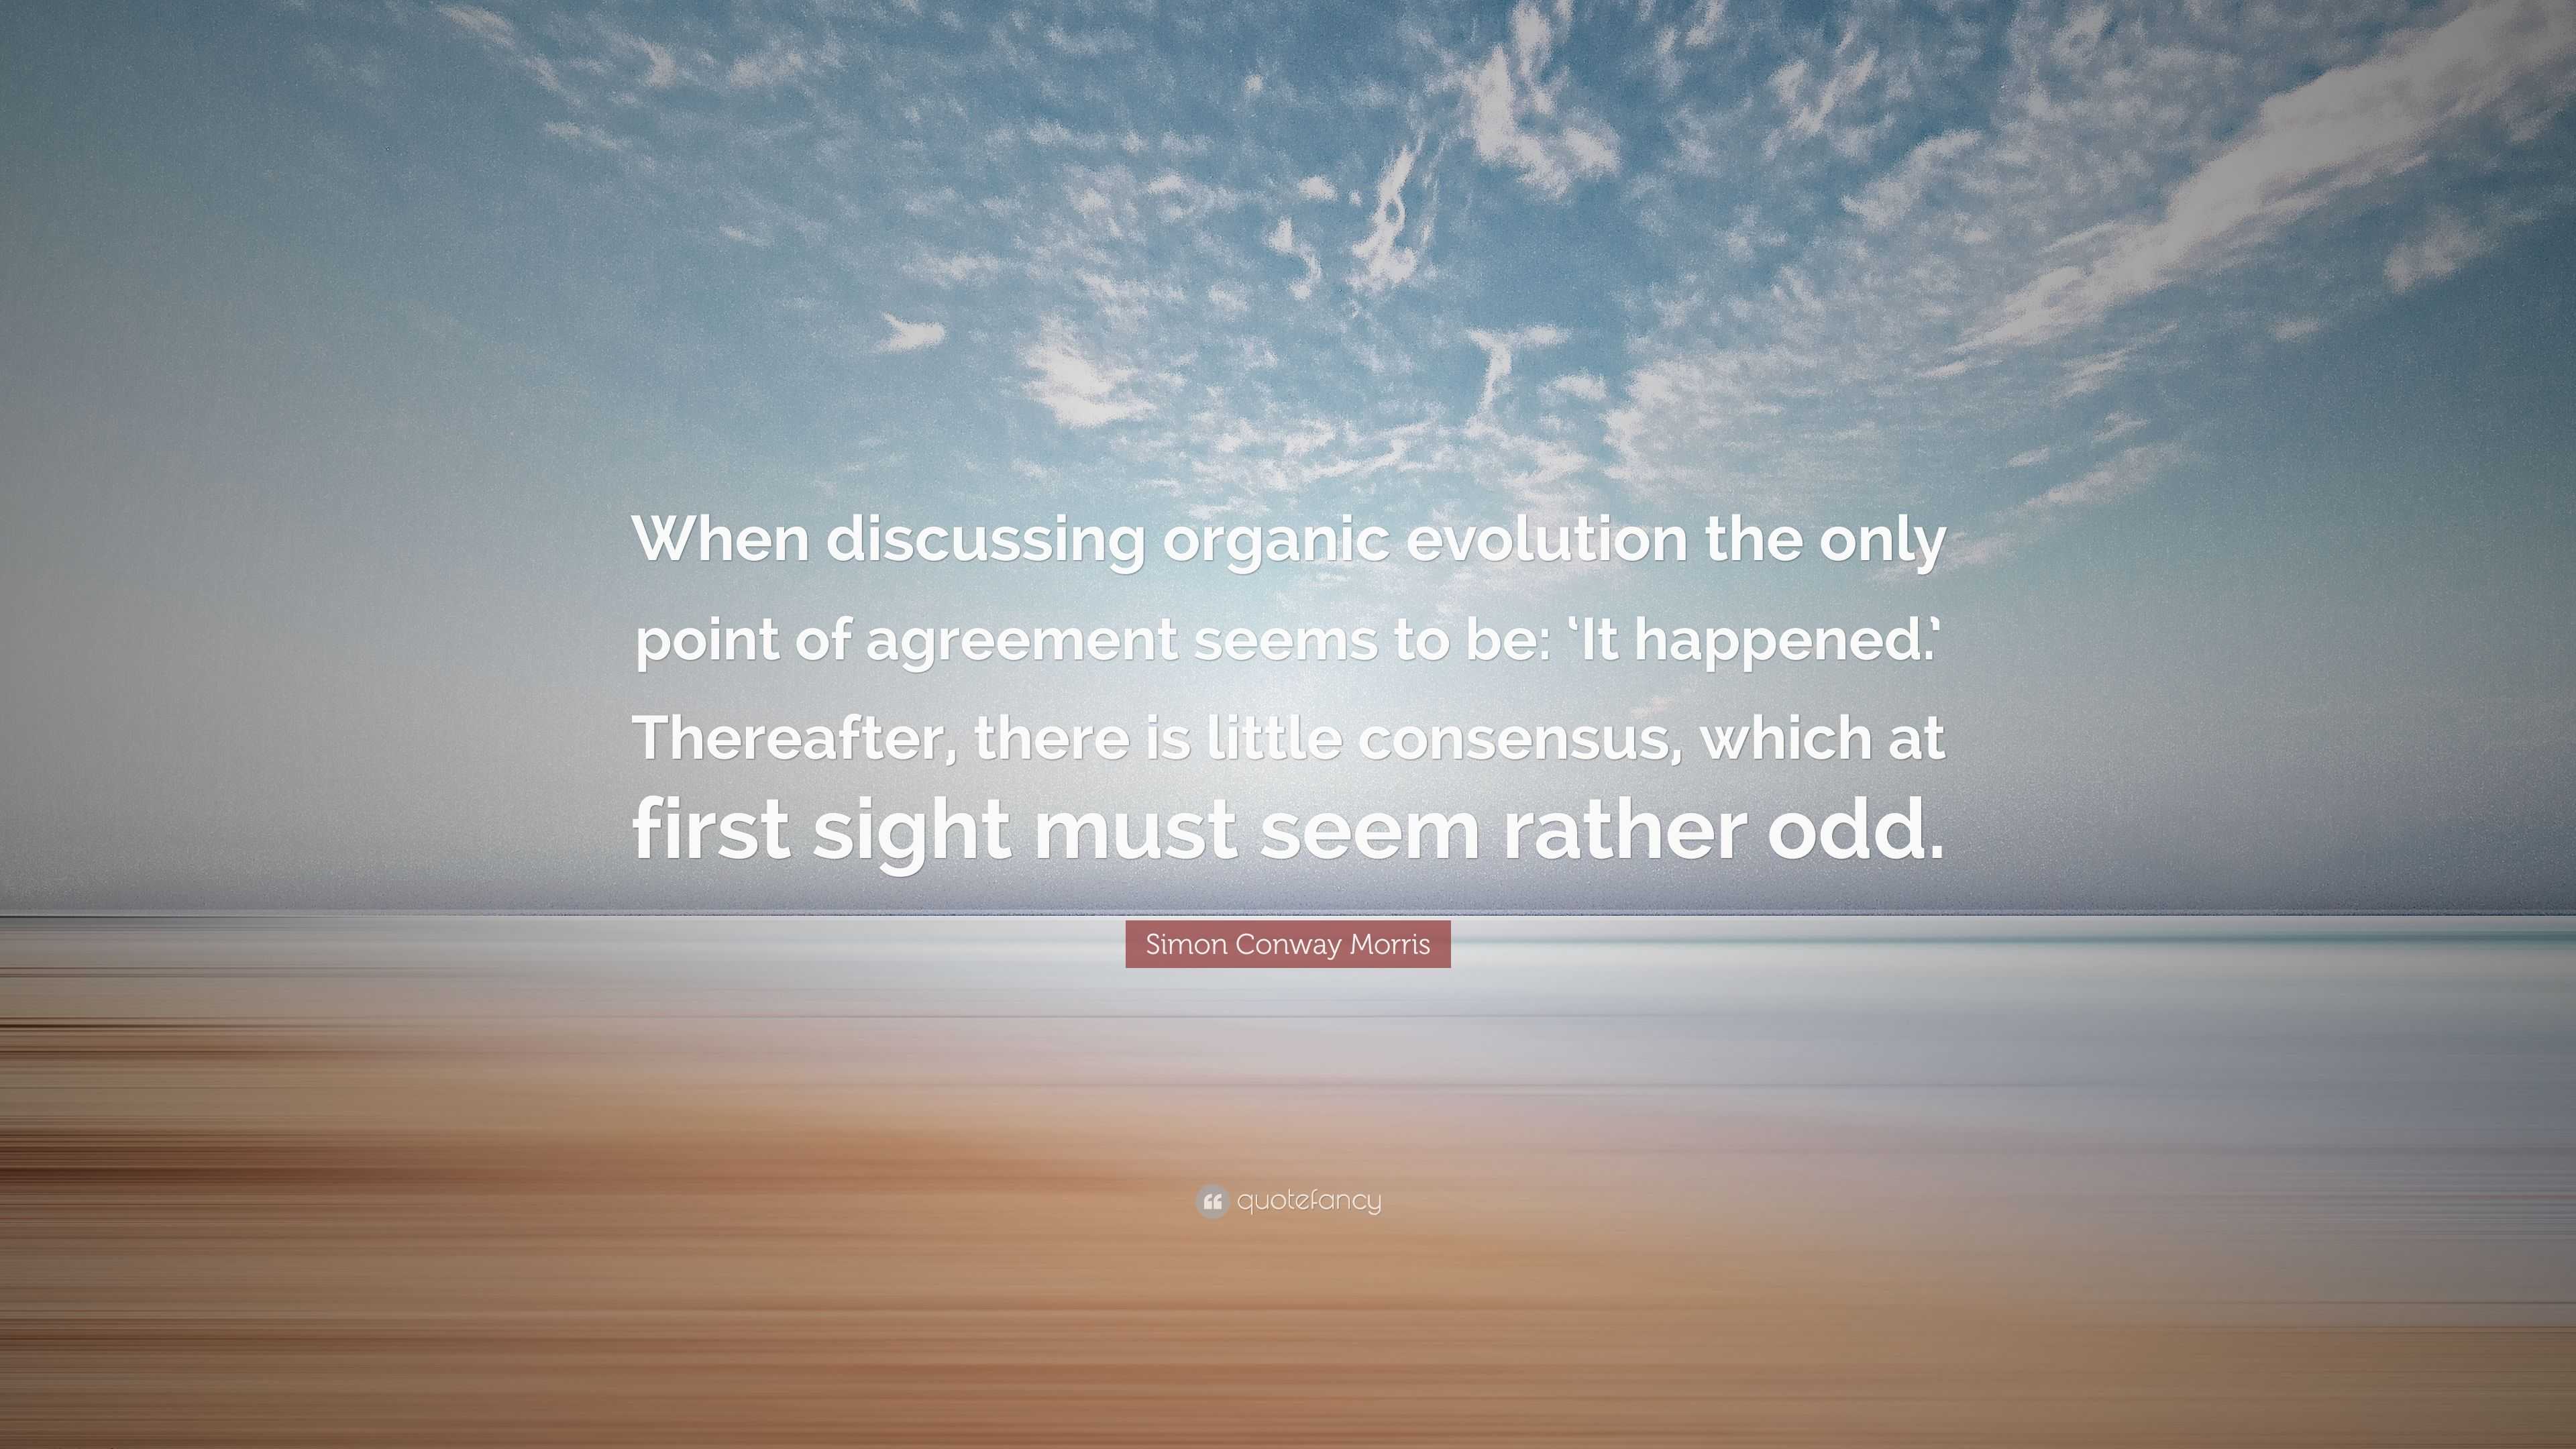 Simon Conway Morris Quote: “When discussing organic evolution the only ...